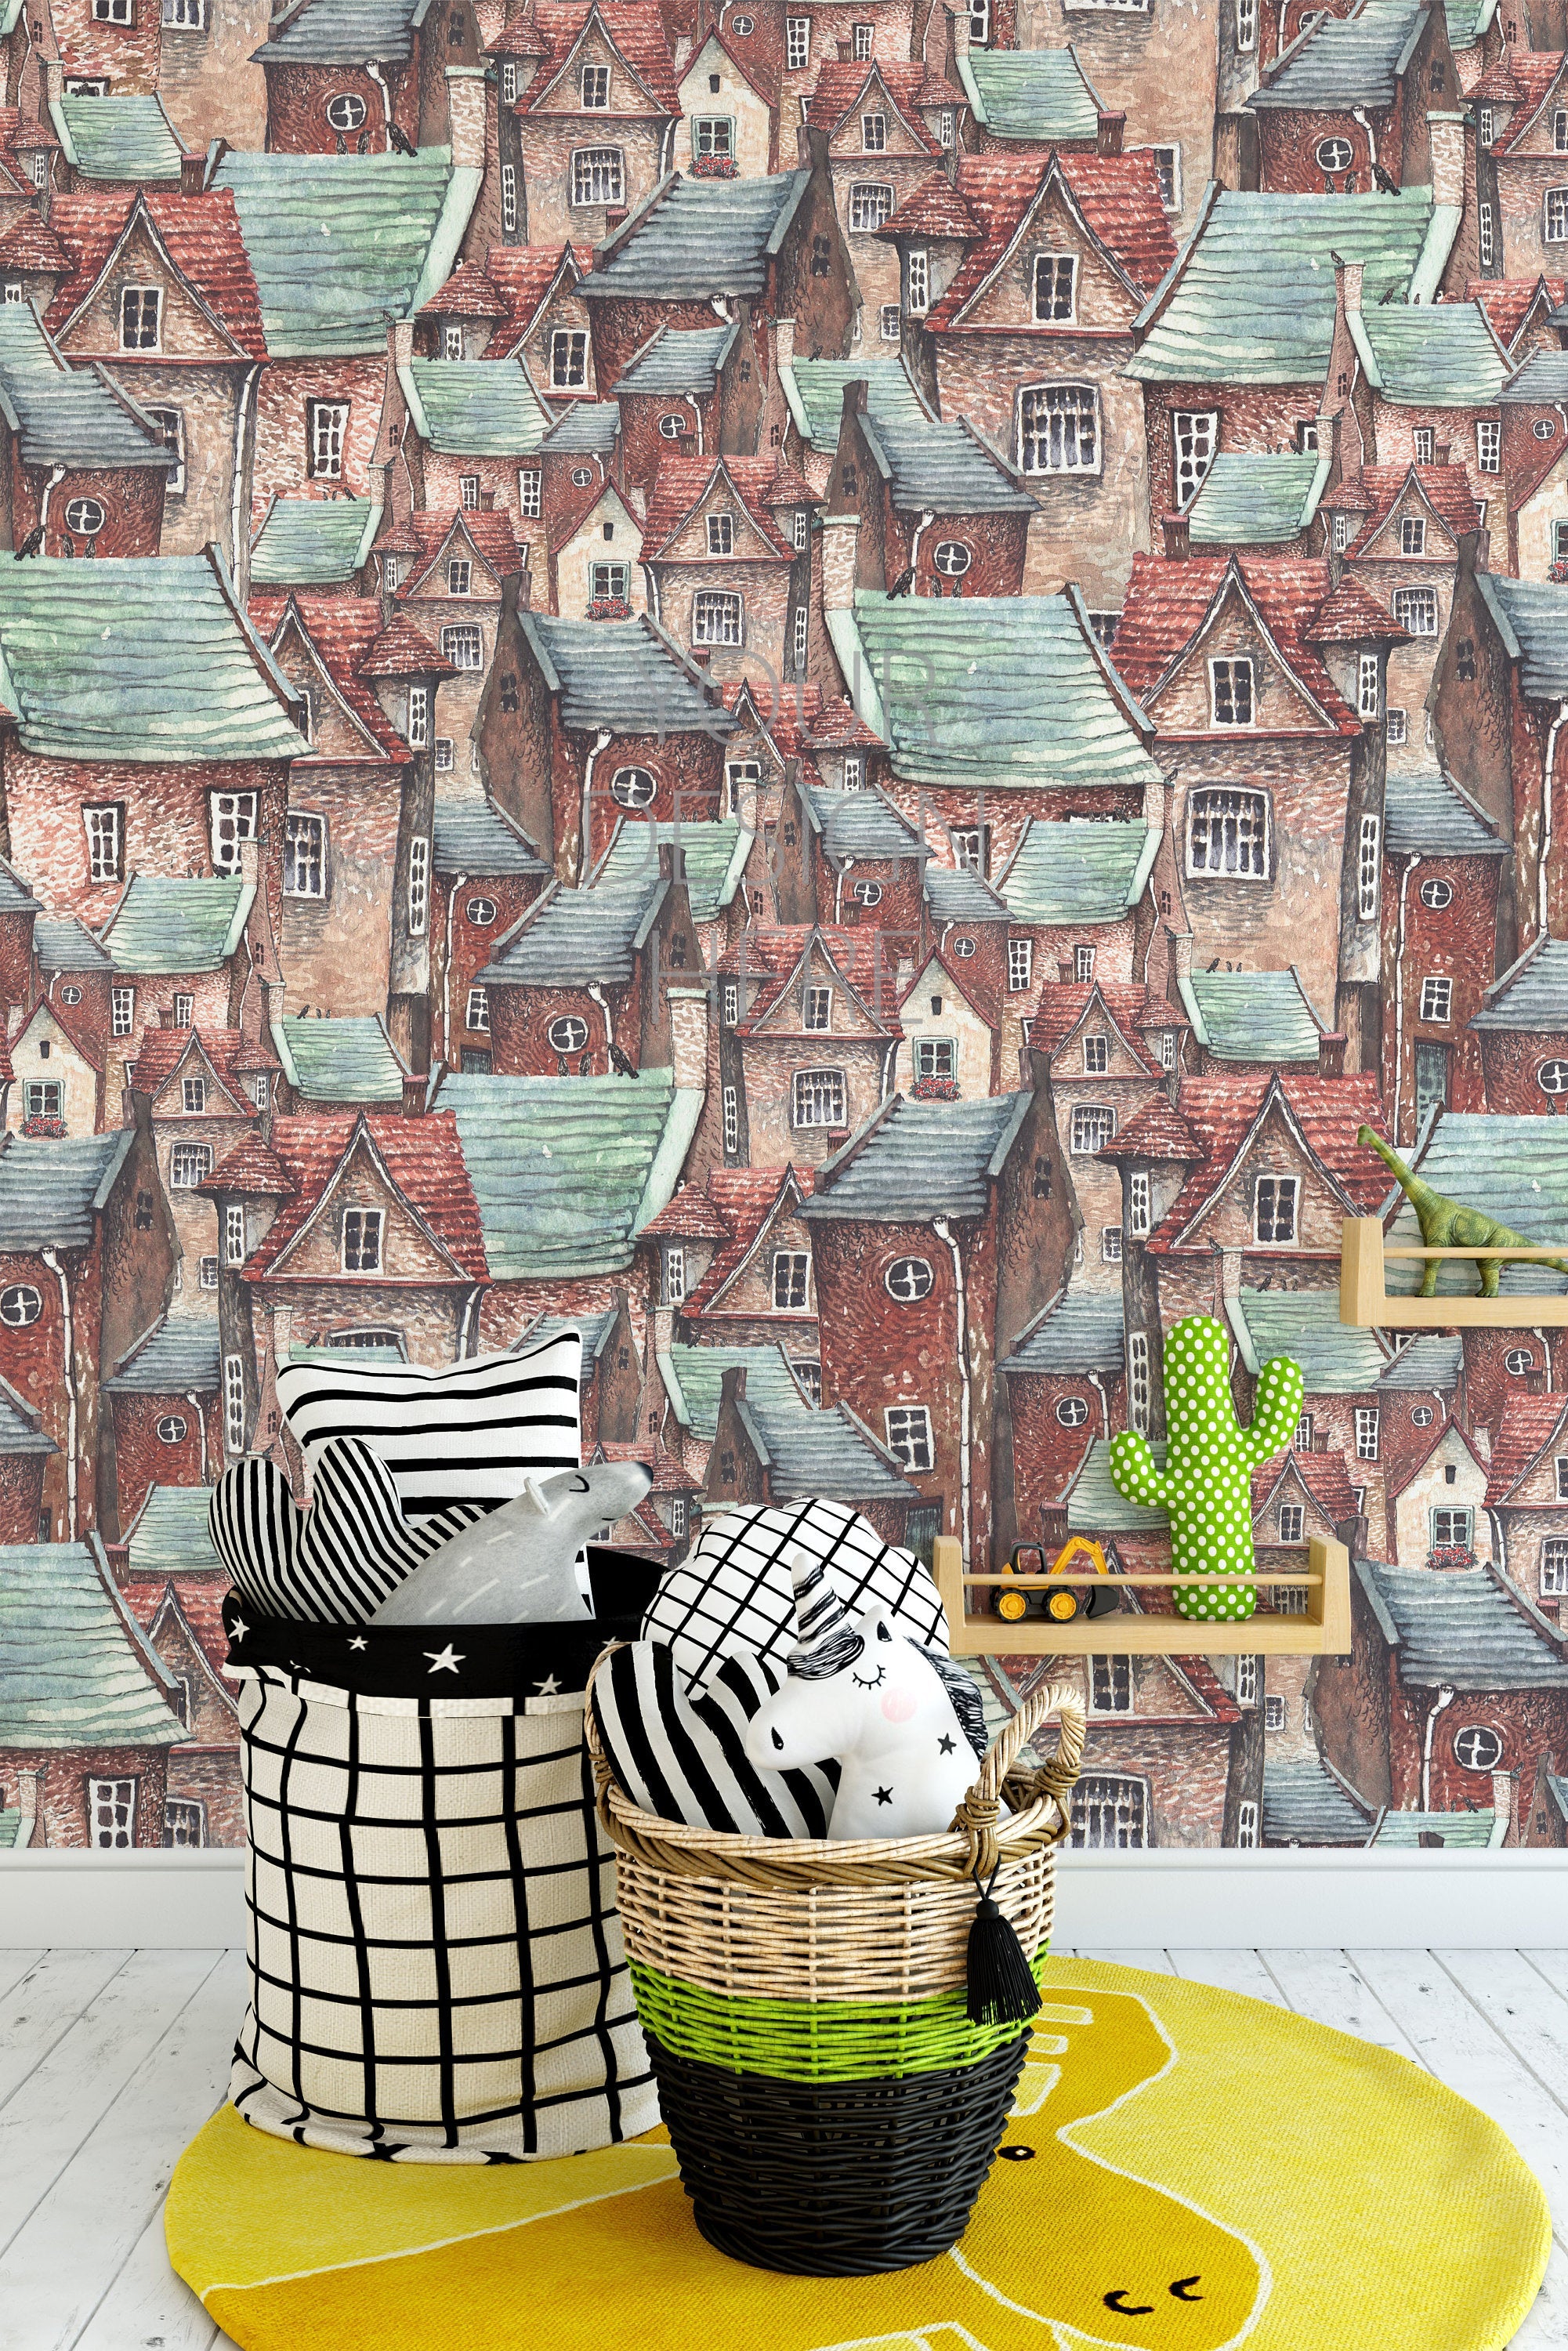 Old Town European Brick Houses and Roofs Background Wallpaper Bedroom Children Kids Room Mural Home Decor Wall Art Removable